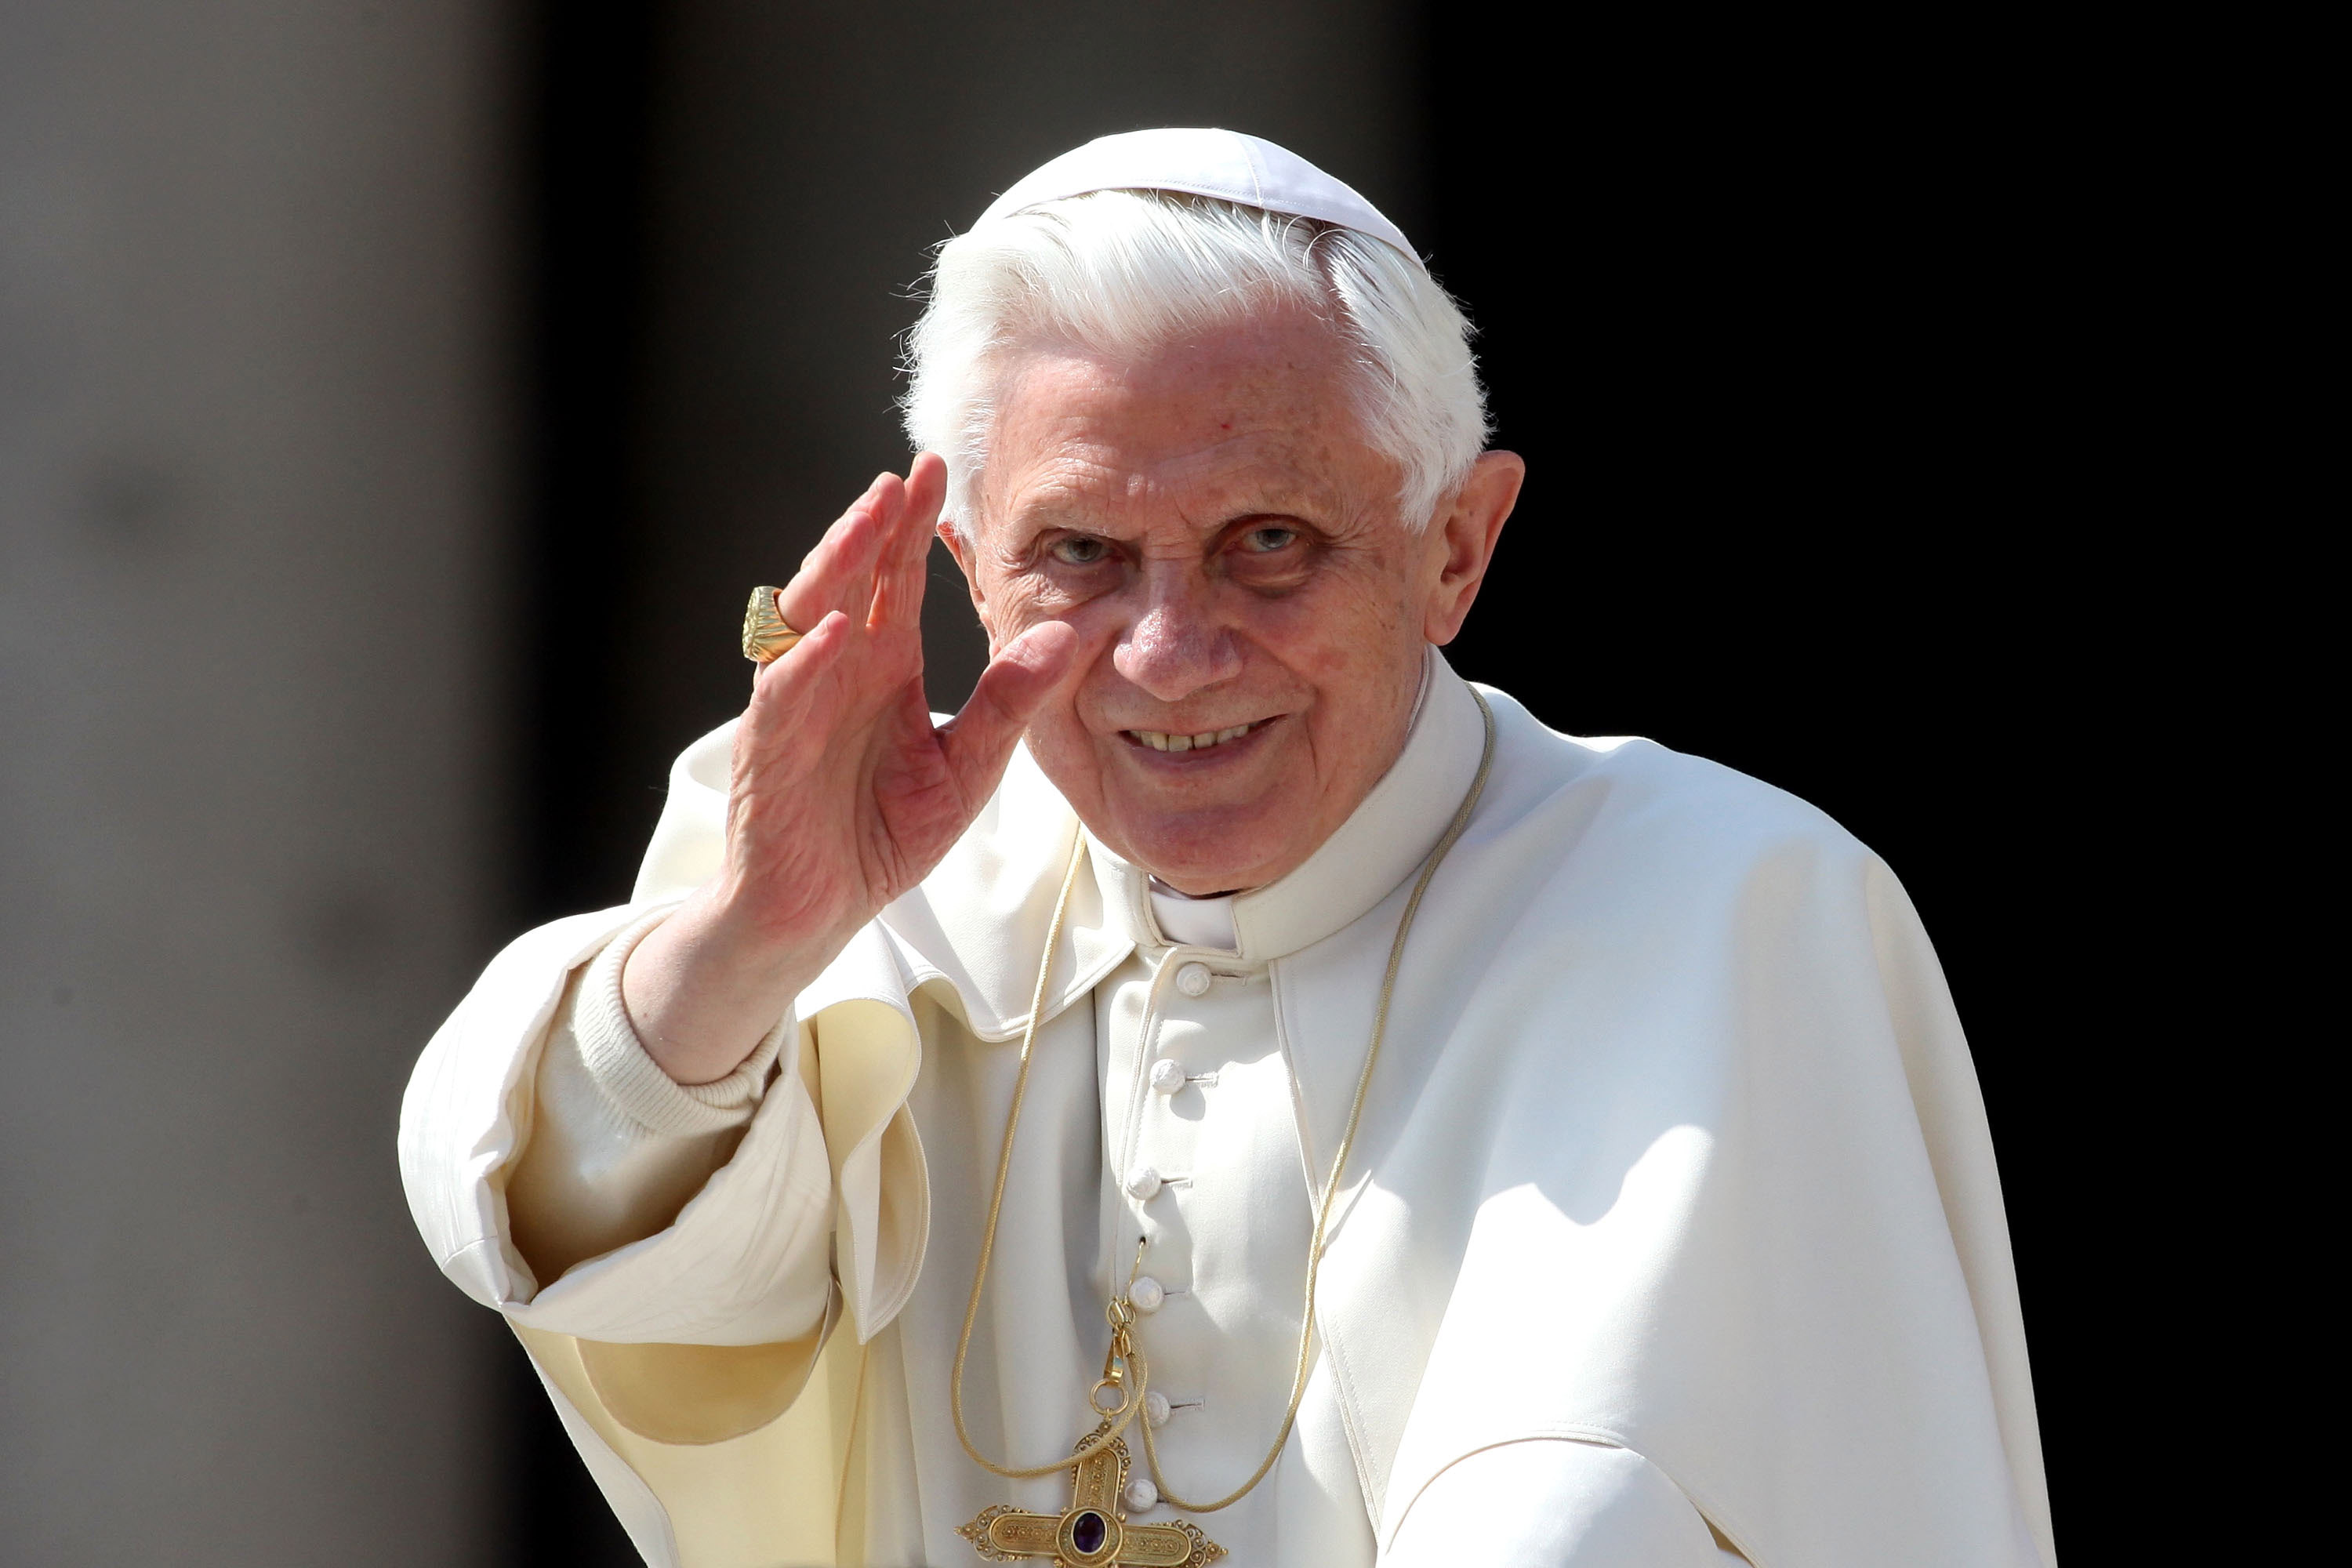 Pope Benedict XVI waves to the faithful gathered in St. Peter's Square during his weekly audience on March 30, 2011, in the Vatican City.